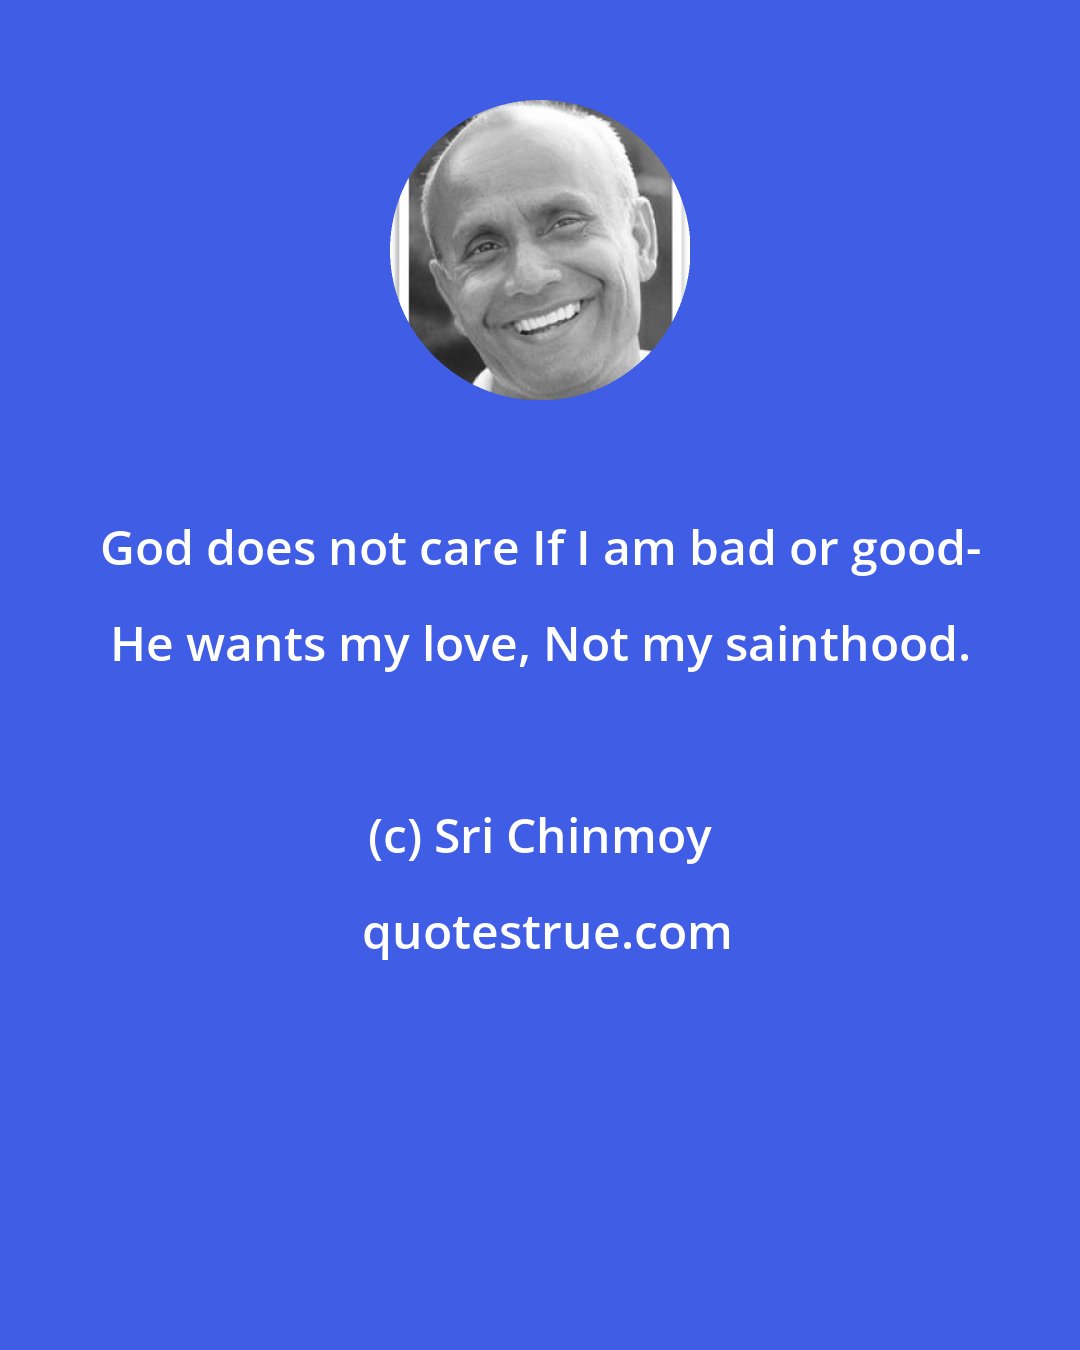 Sri Chinmoy: God does not care If I am bad or good- He wants my love, Not my sainthood.